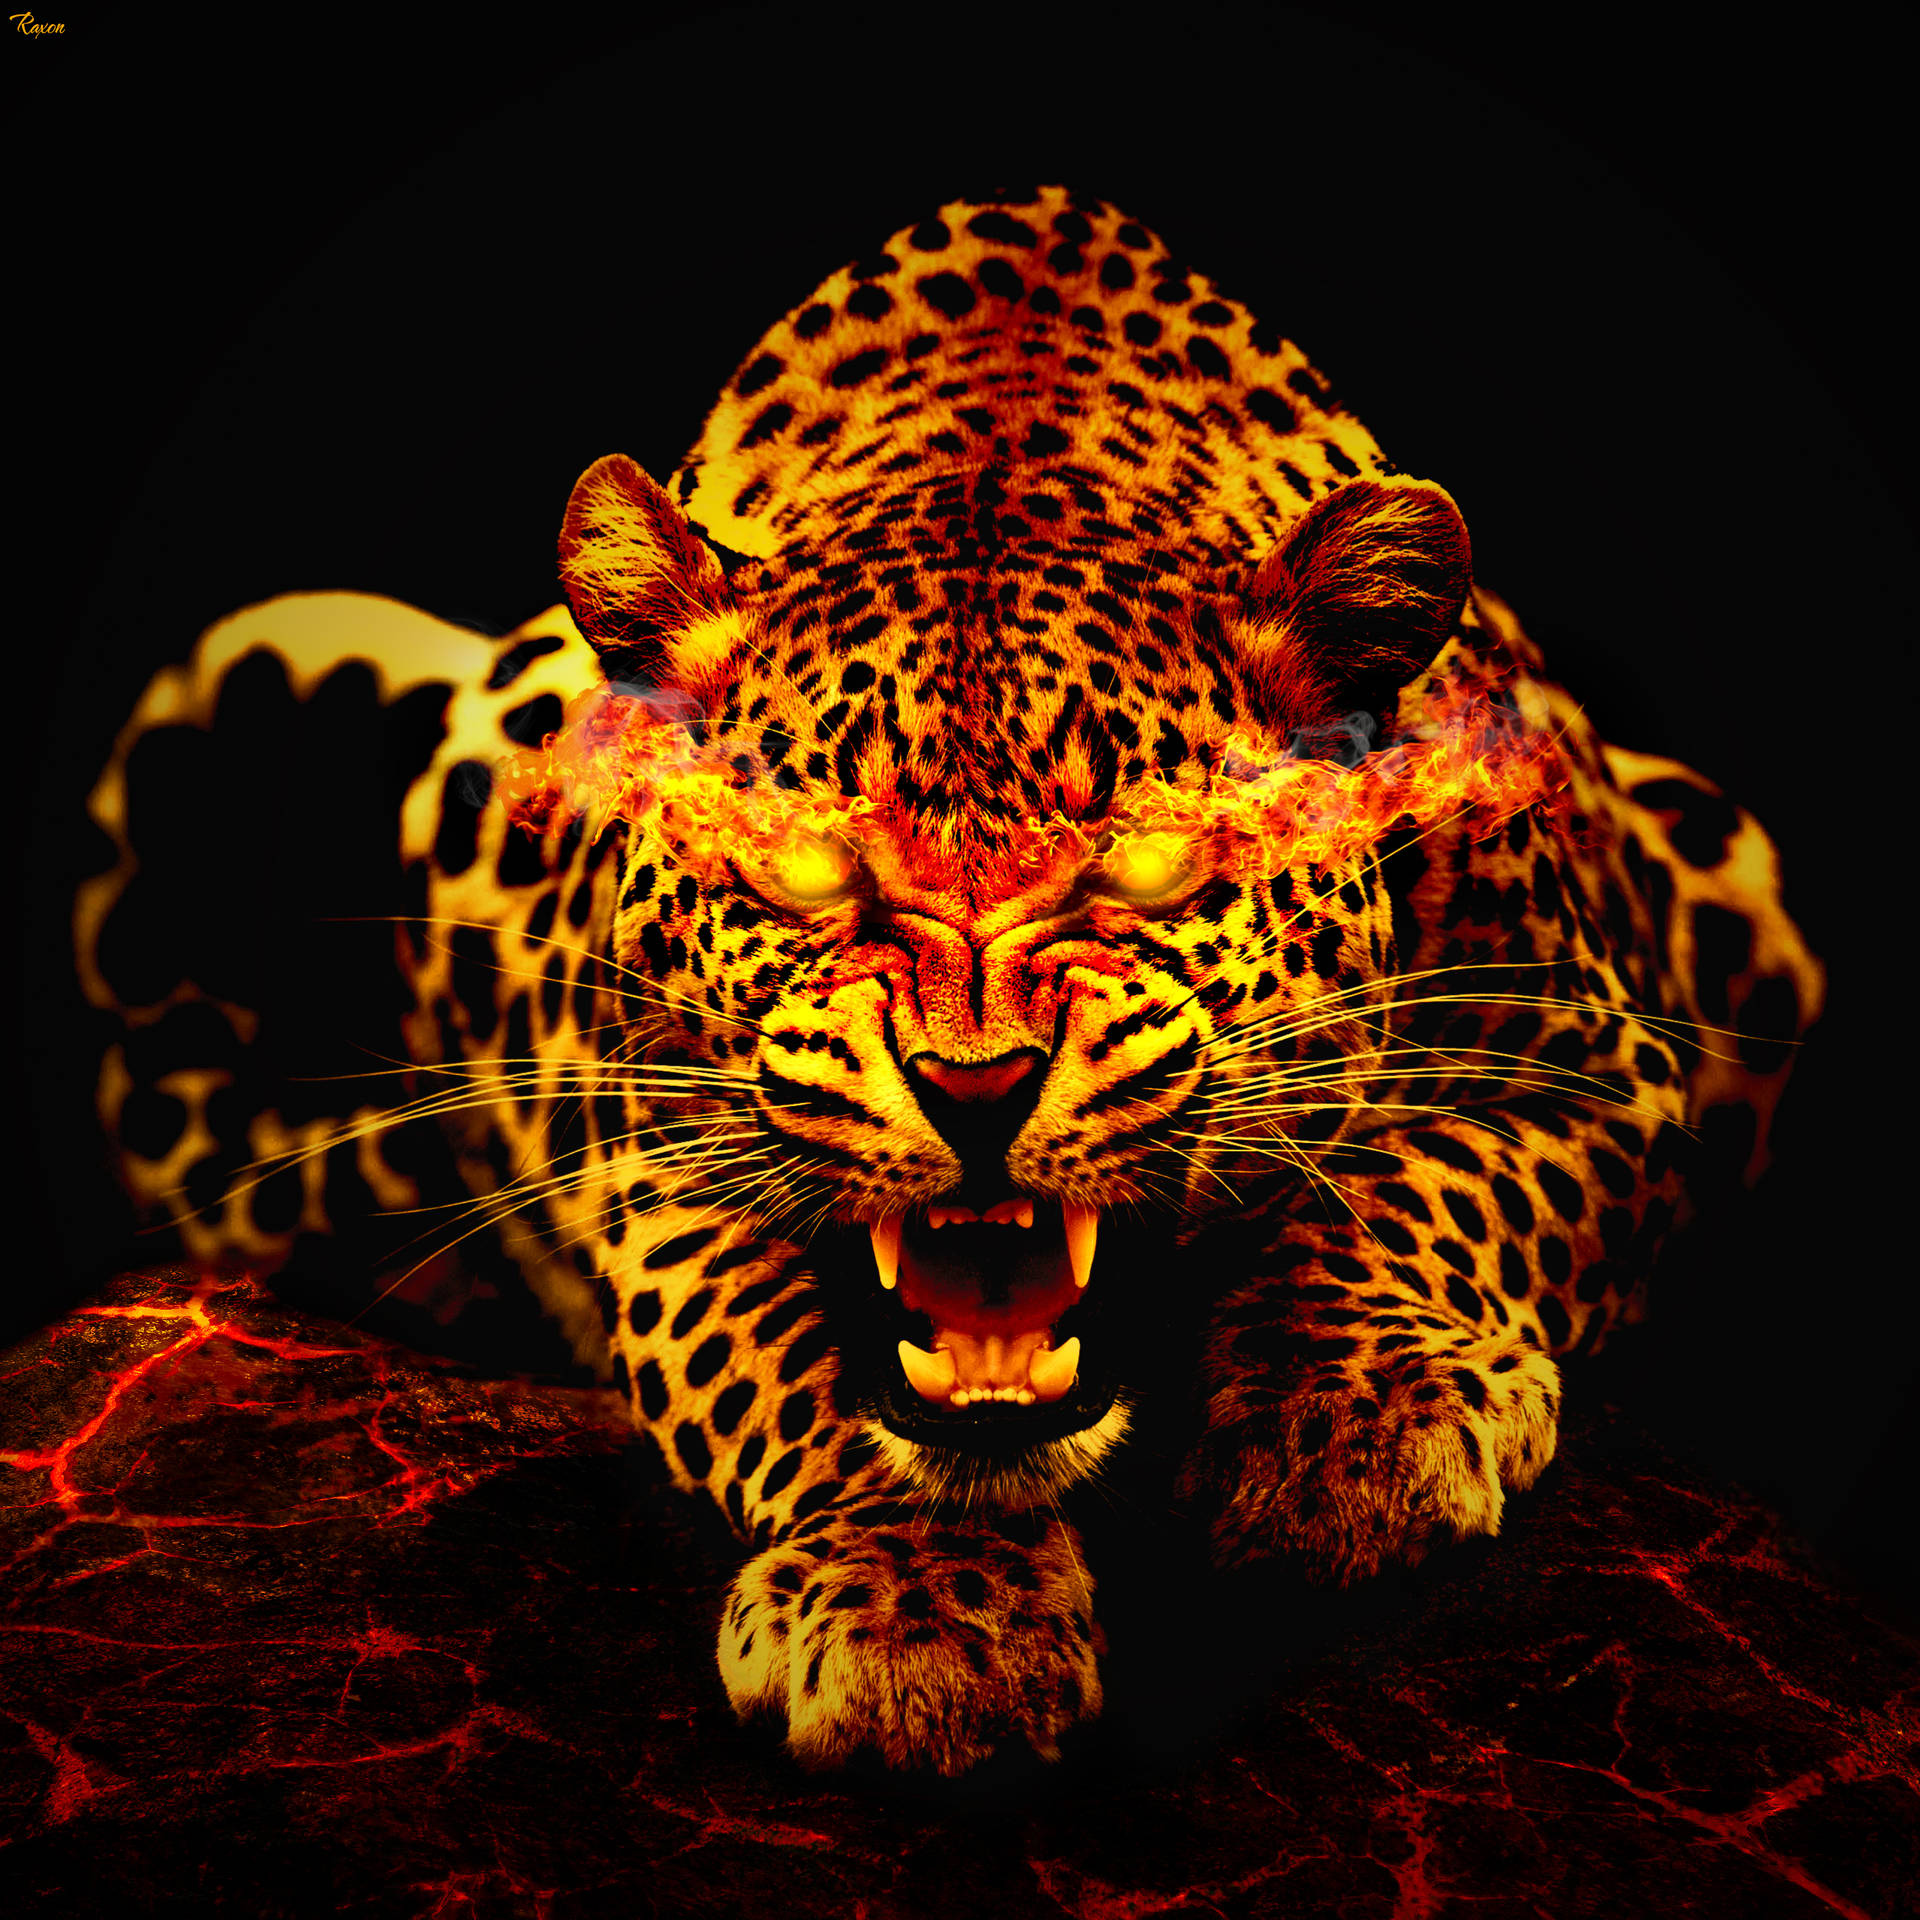 Leopard 2548X2548 Wallpaper and Background Image